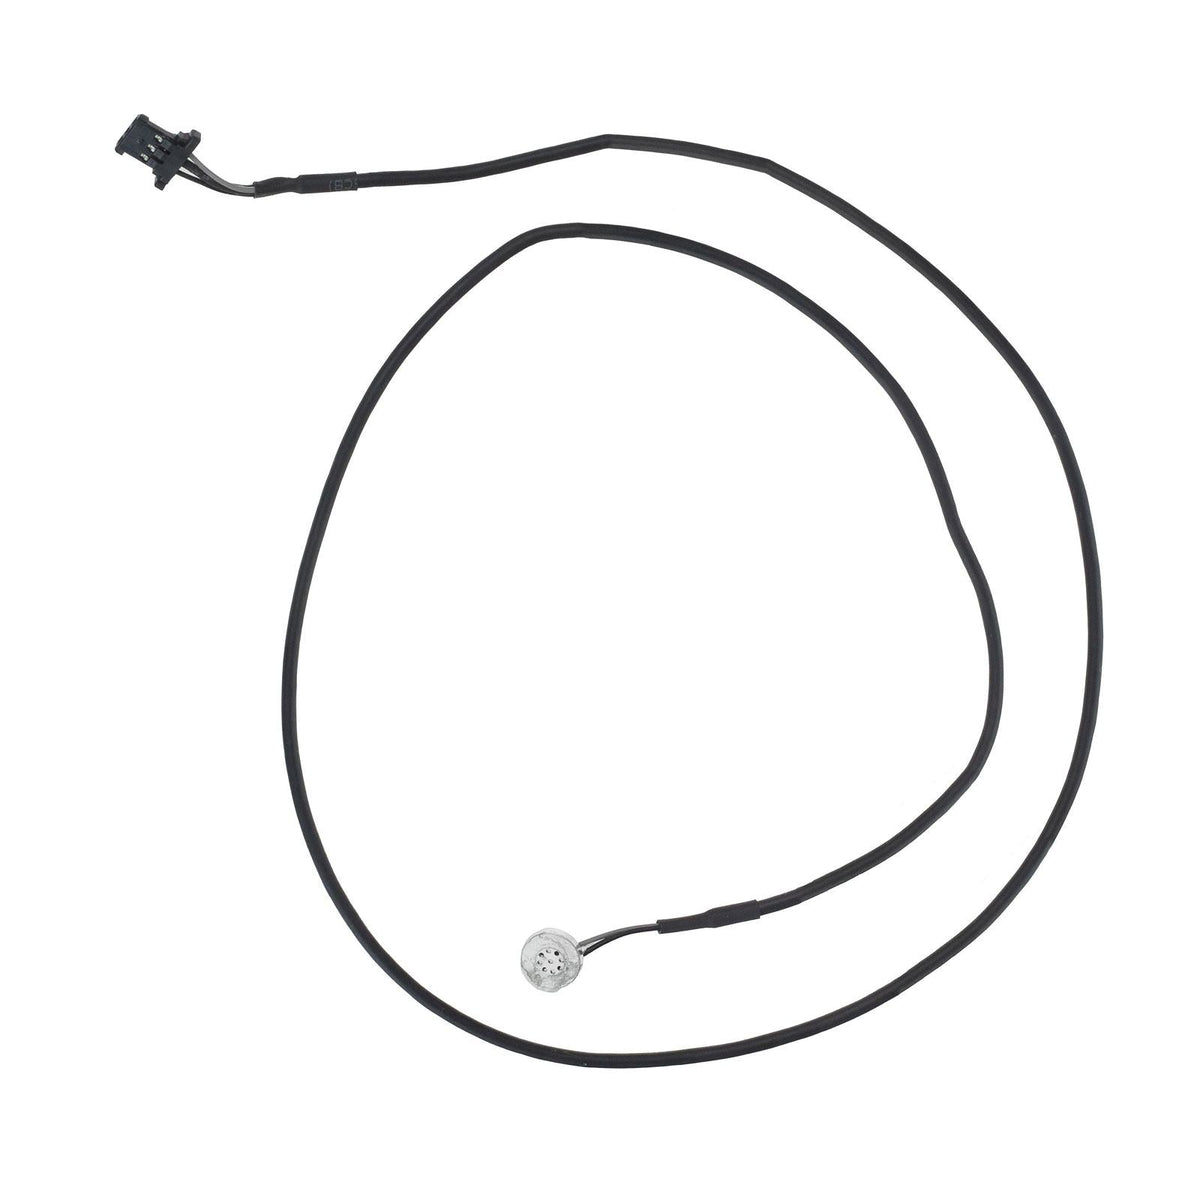 MICROPHONE CABLE  FOR IMAC 21.5" A1311 (MID 2011 - LATE 2011)